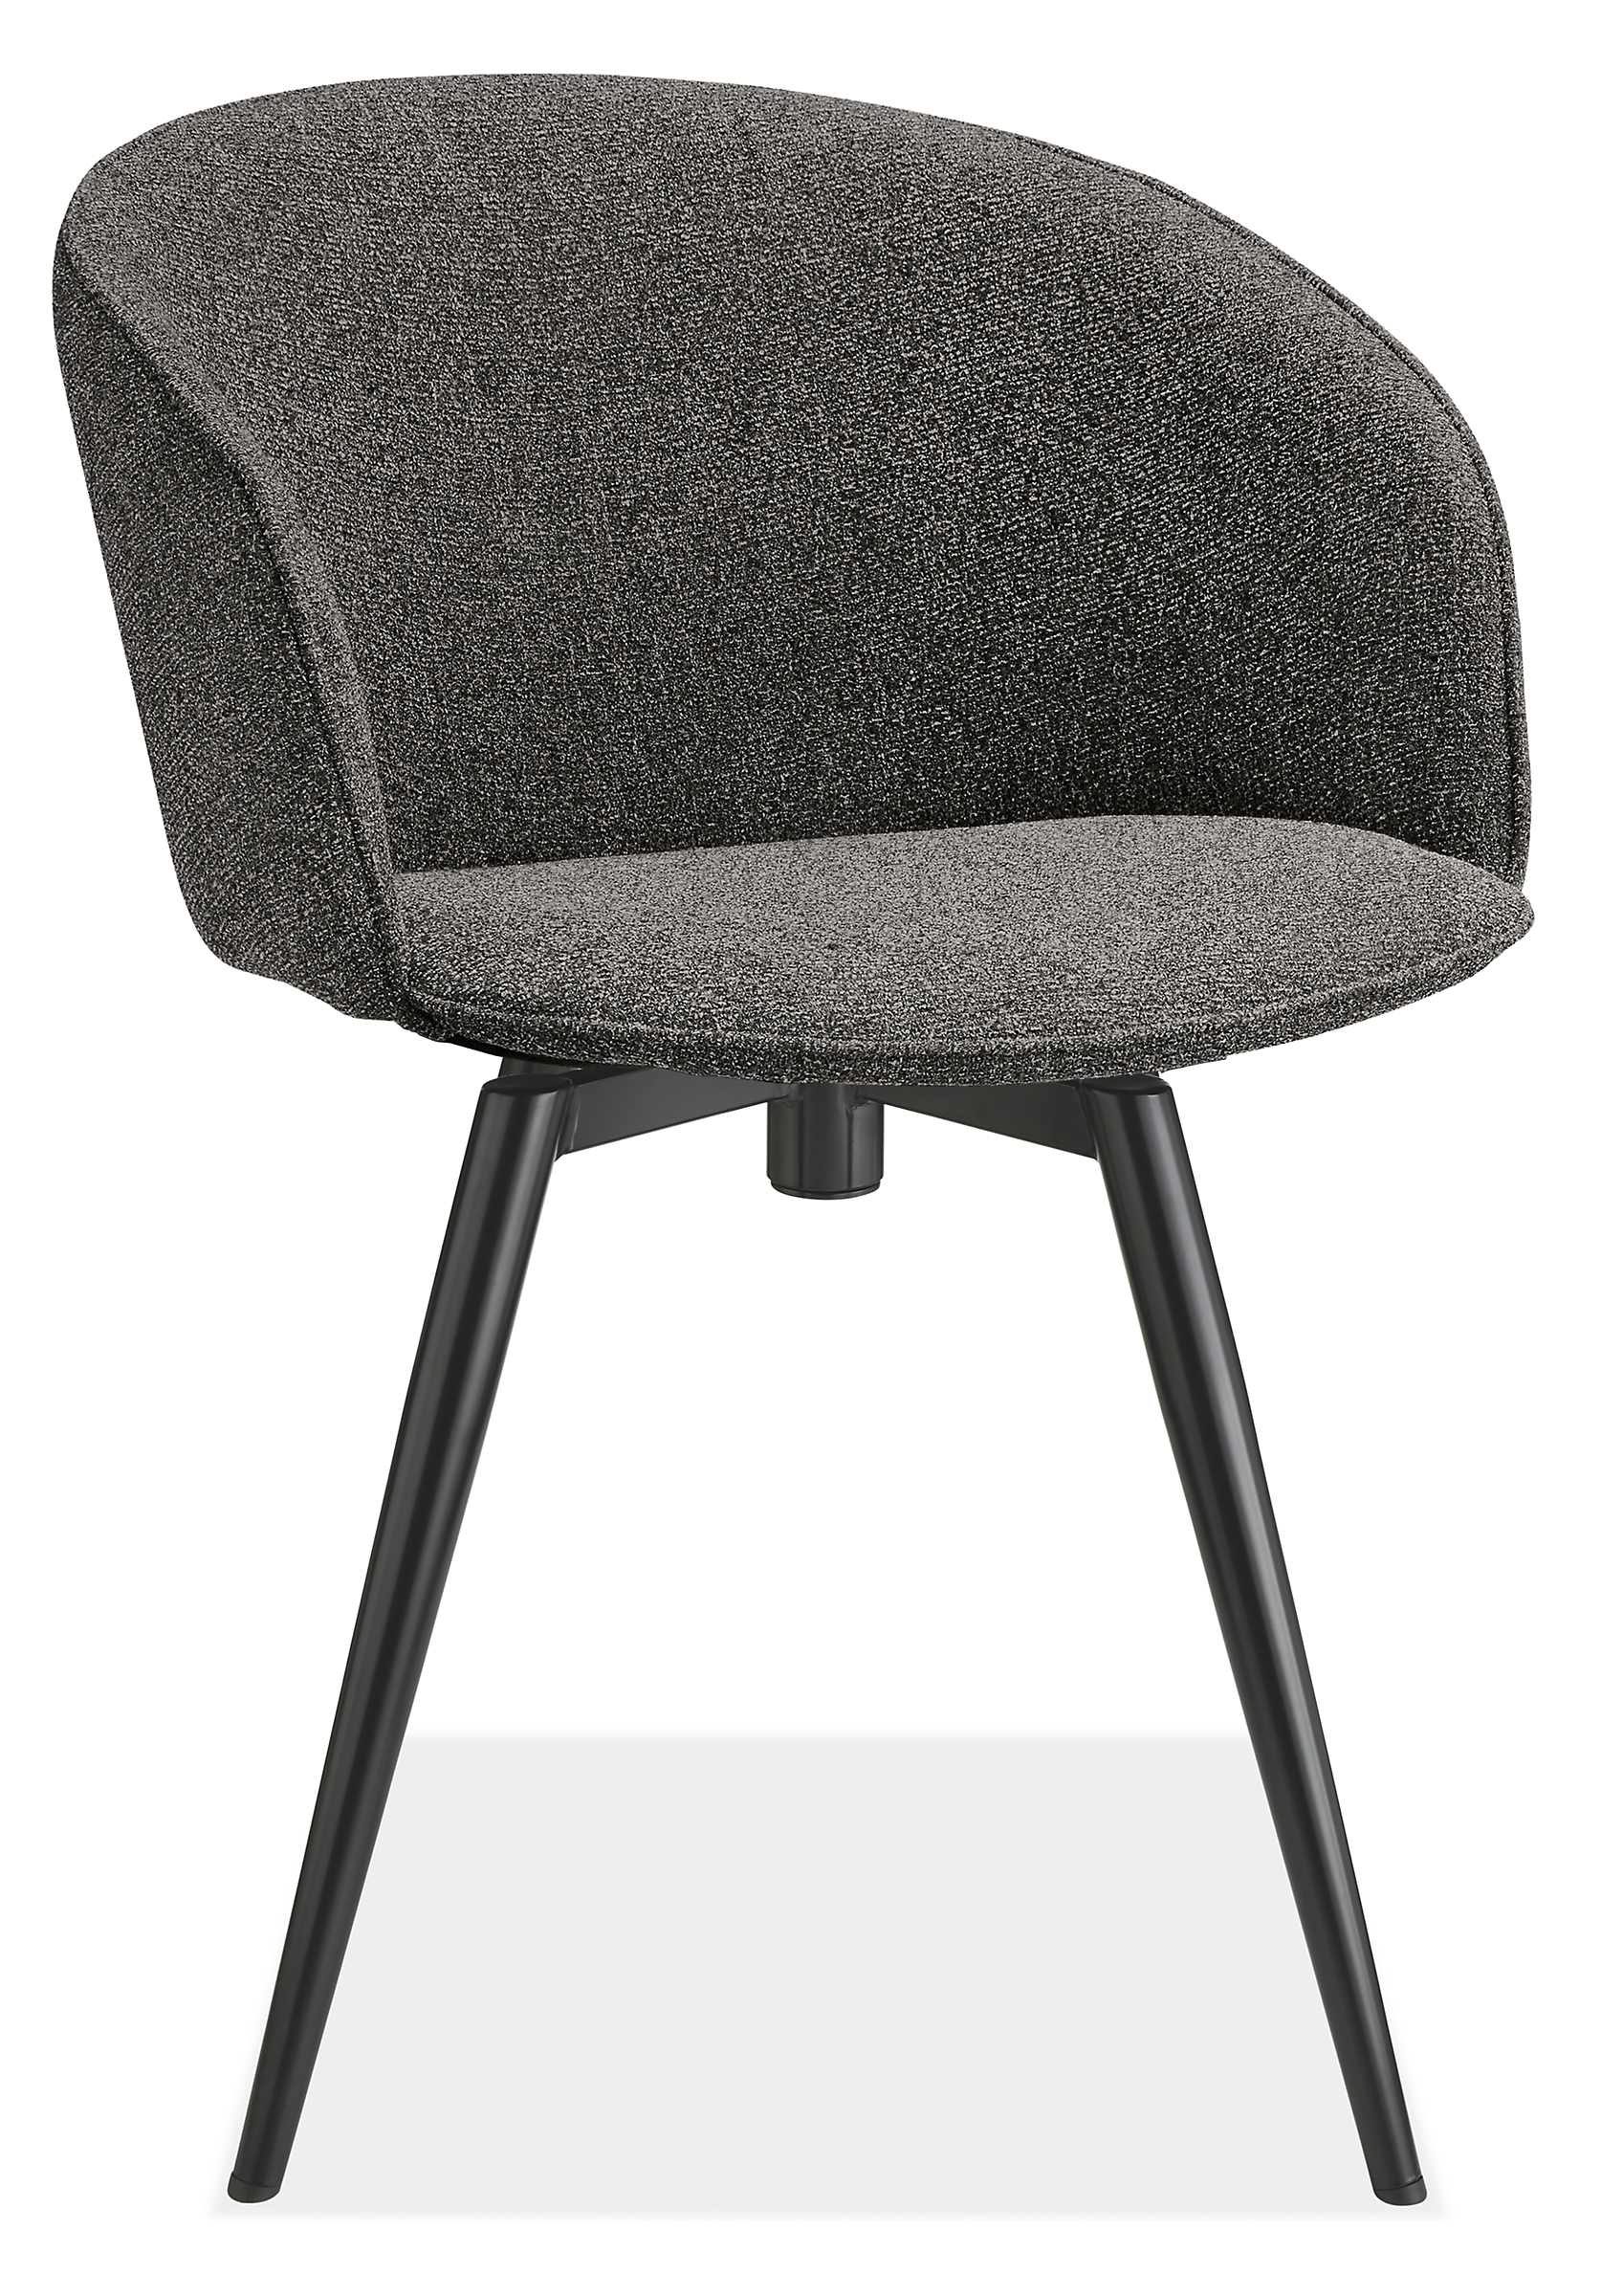 Swiveled view of Sylvan Swivel Side Chair in Radford Grey Fabric and graphite base.